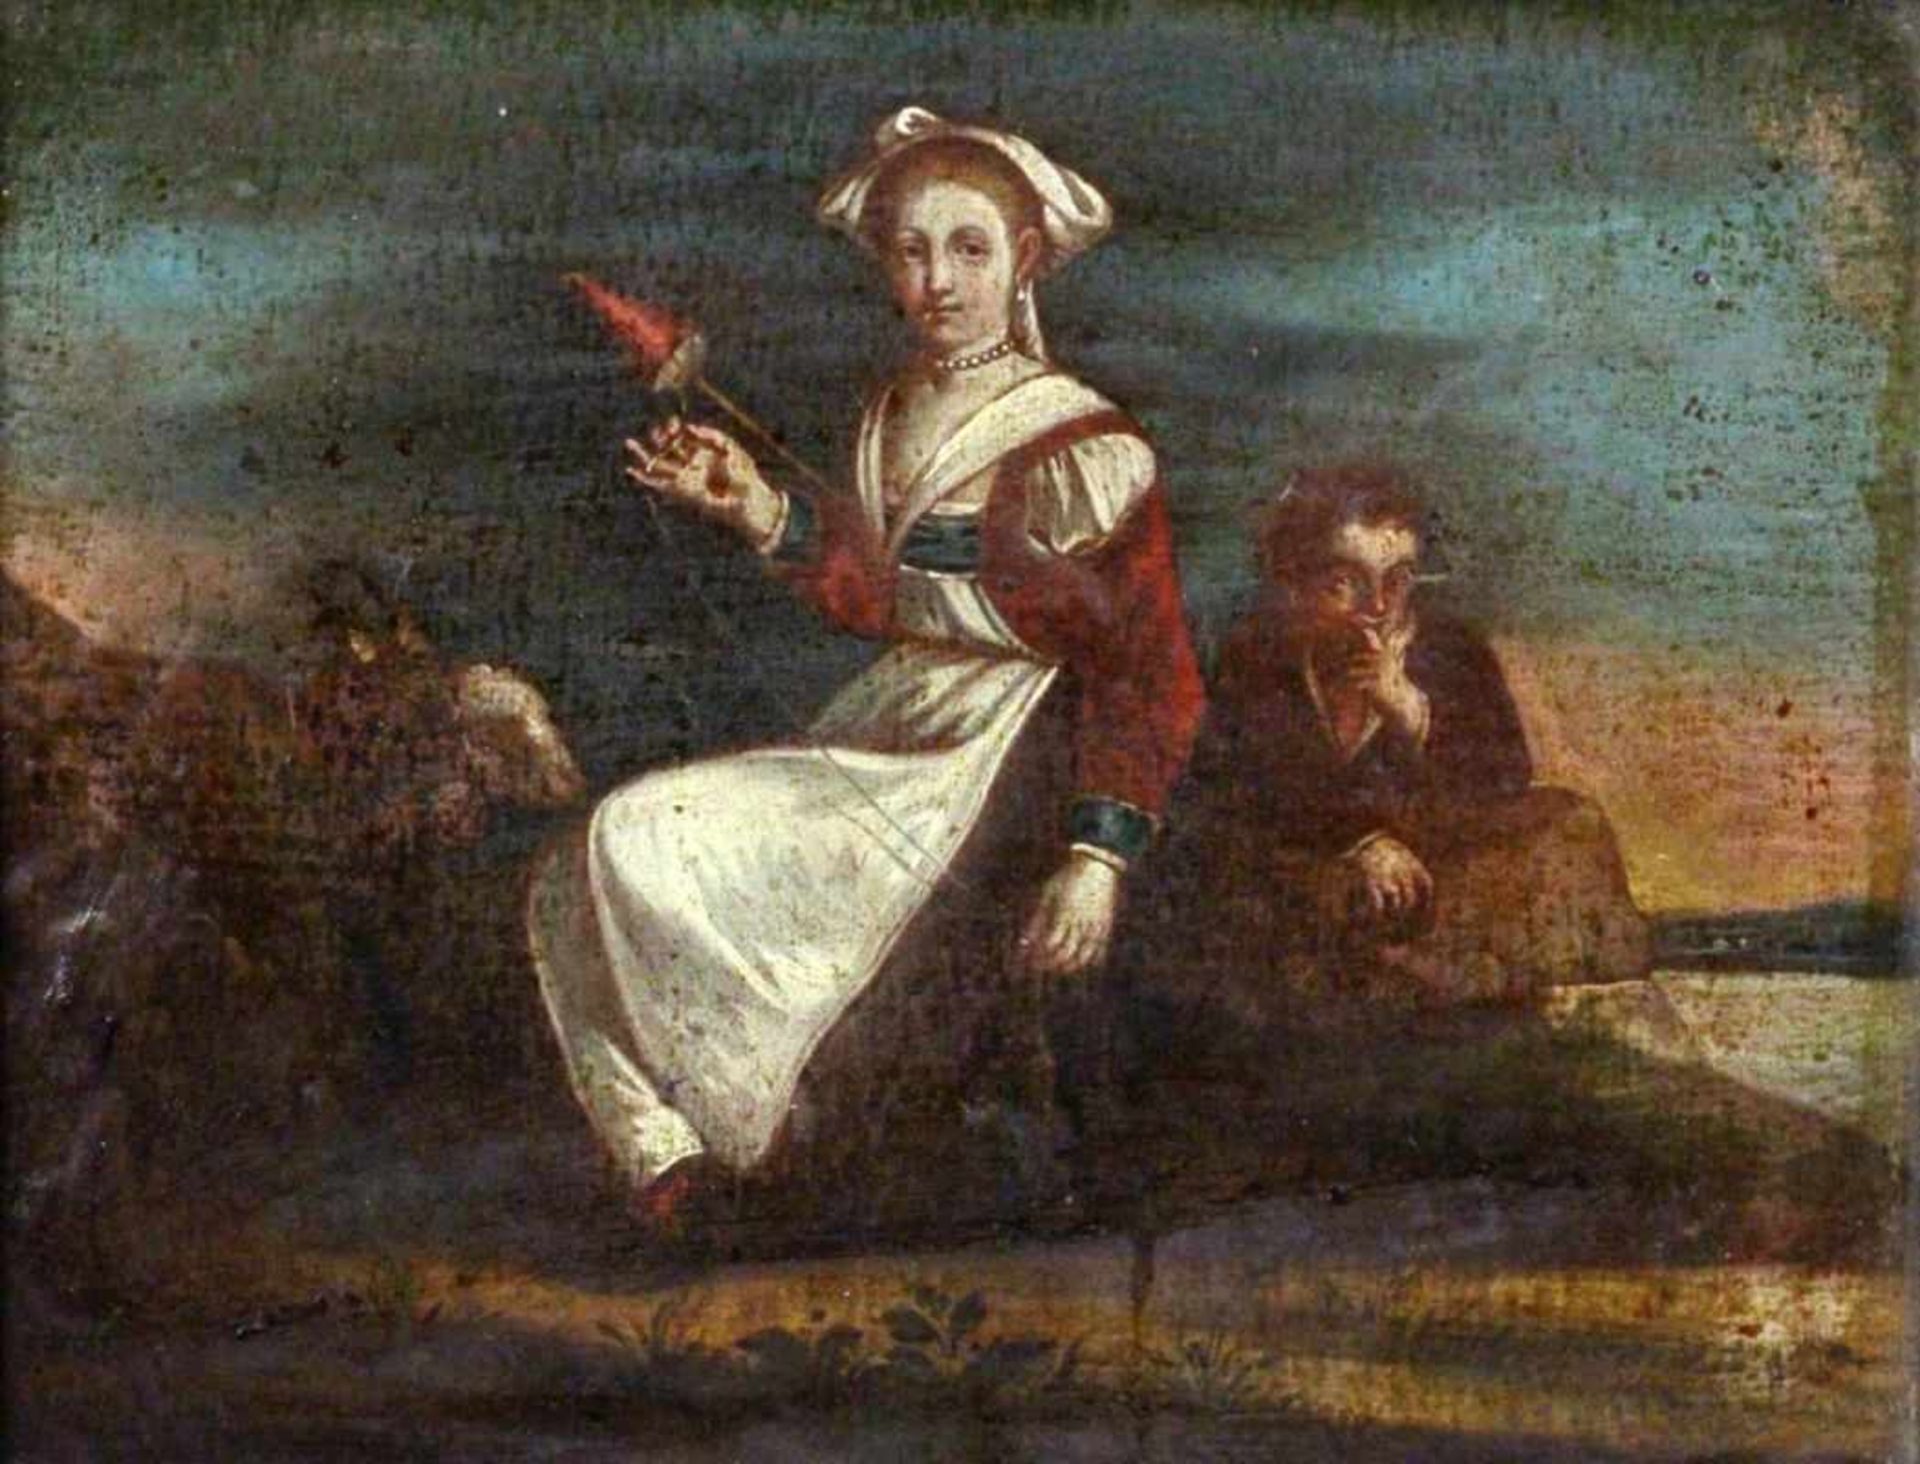 FRENCH SCHOOL 18th century A shepherd and shepherdess with sheep in landscape. Womanspinning wool.